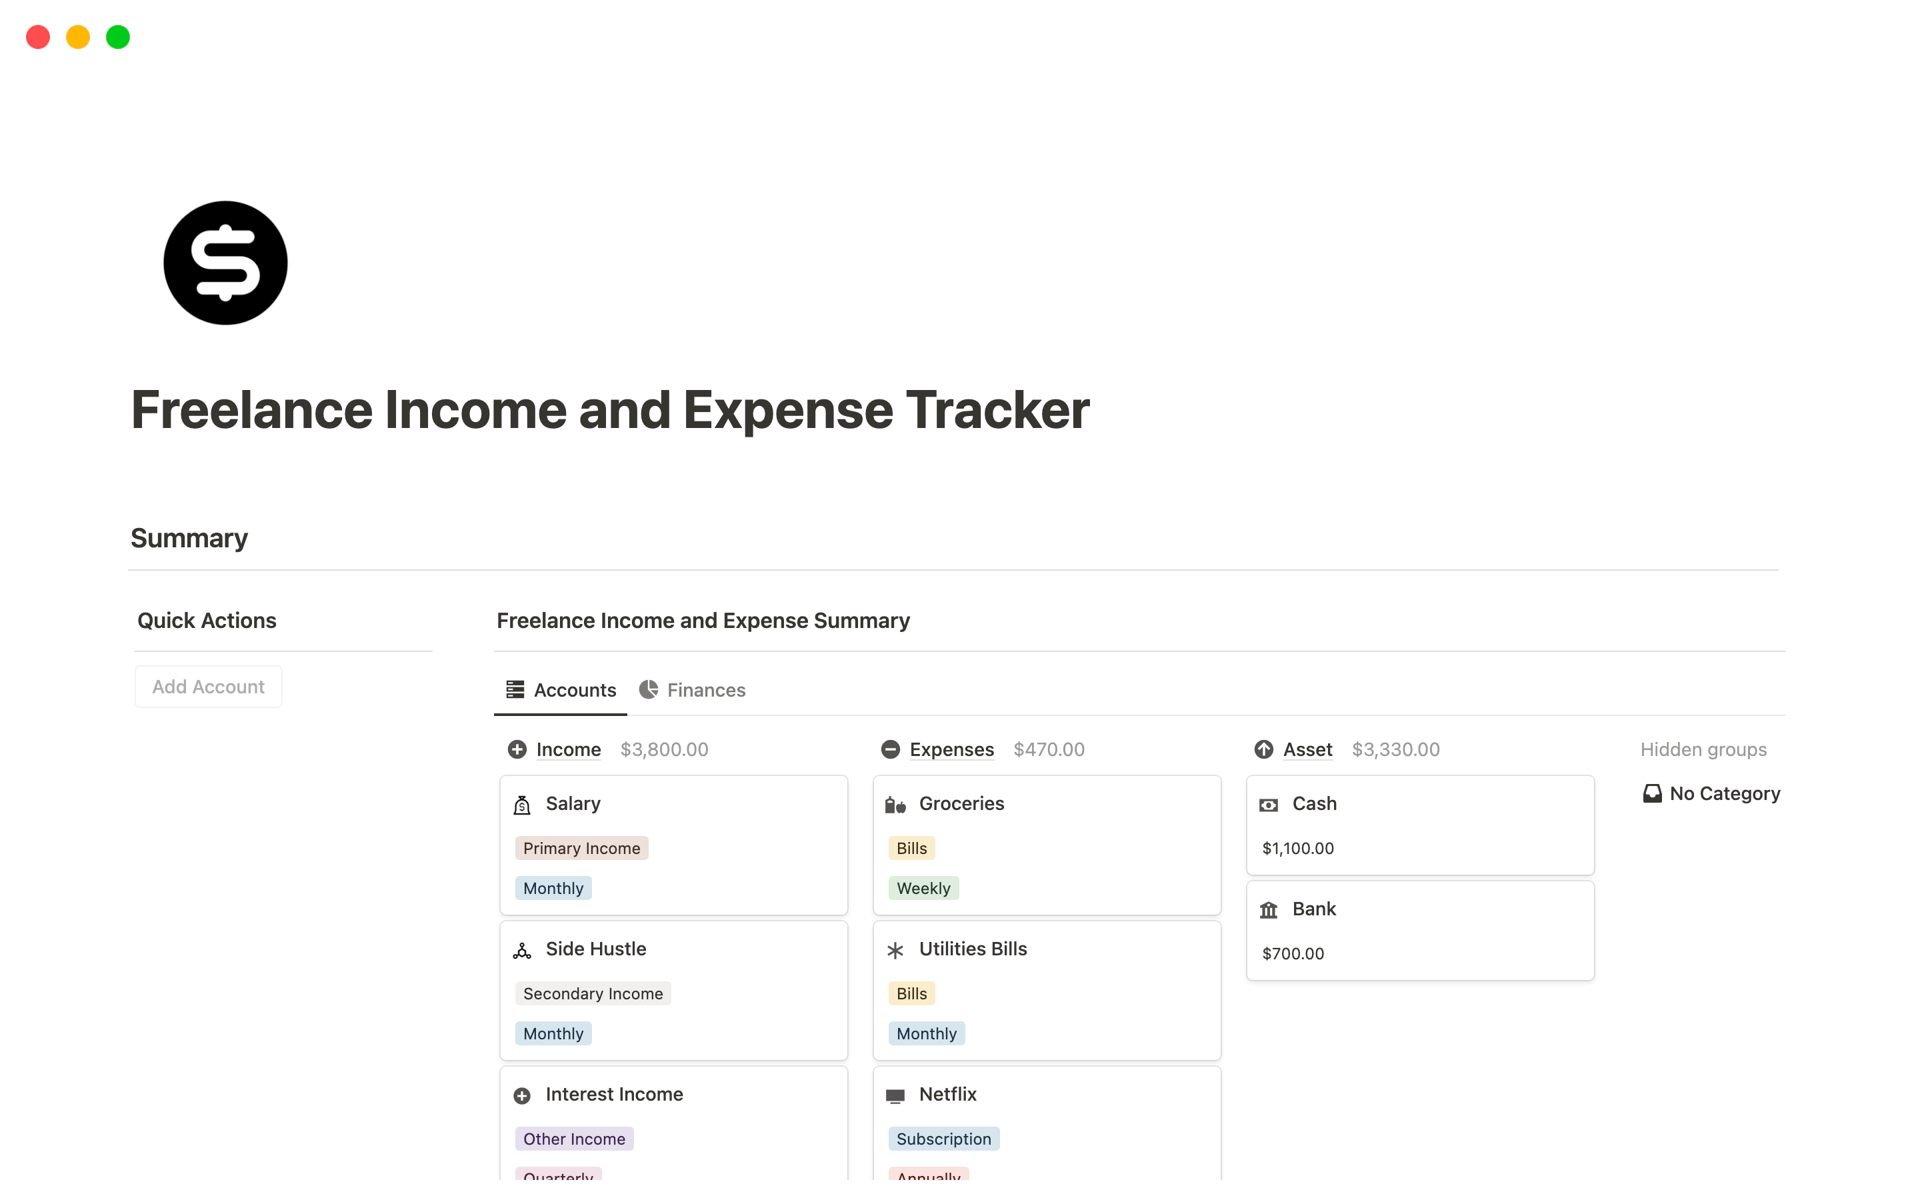 This tracker is specifically designed for freelancers, it tracks income, business expenses, and taxes to simplify financial management for self-employed individuals.